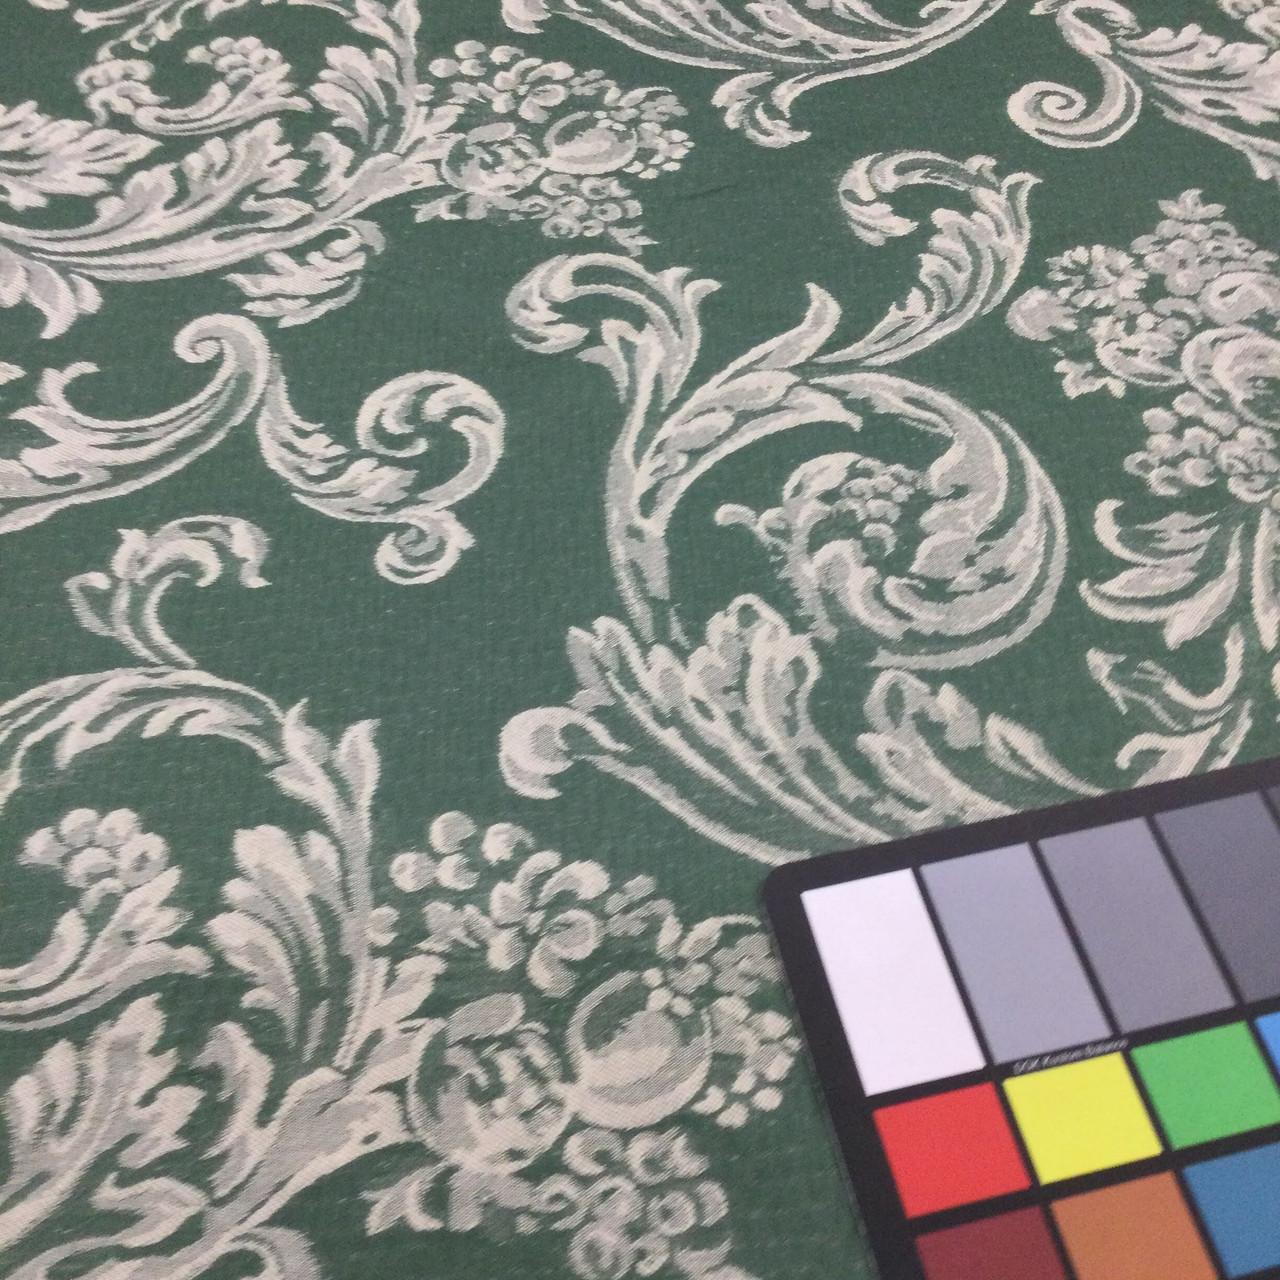 Damask Jacquard Fabric, Green / Off White, Upholstery / Slipcovers, Medium Weight, 54 Wide